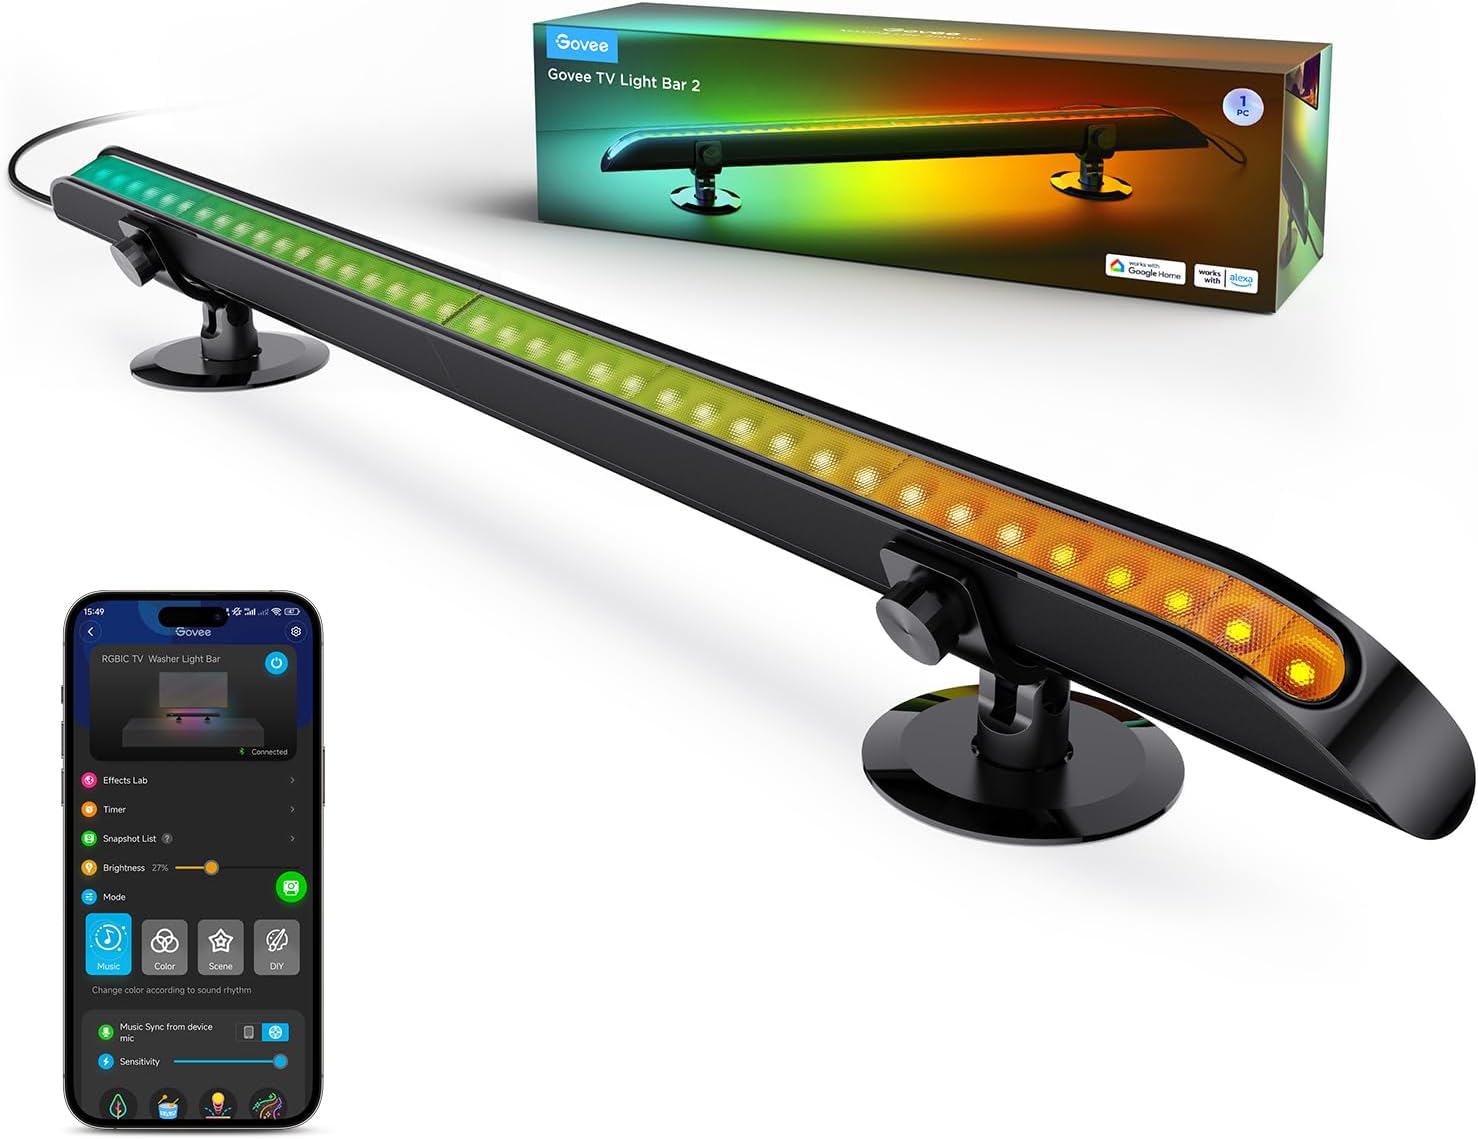 Govee New Smart TV Light Bar 2 [YMMV], 31 Inch LED Light Bar with Scene and Music Modes, RGBIC WiFi TV Light Bar, Suitable for 55-70 inch TVs, Voice - $55.99